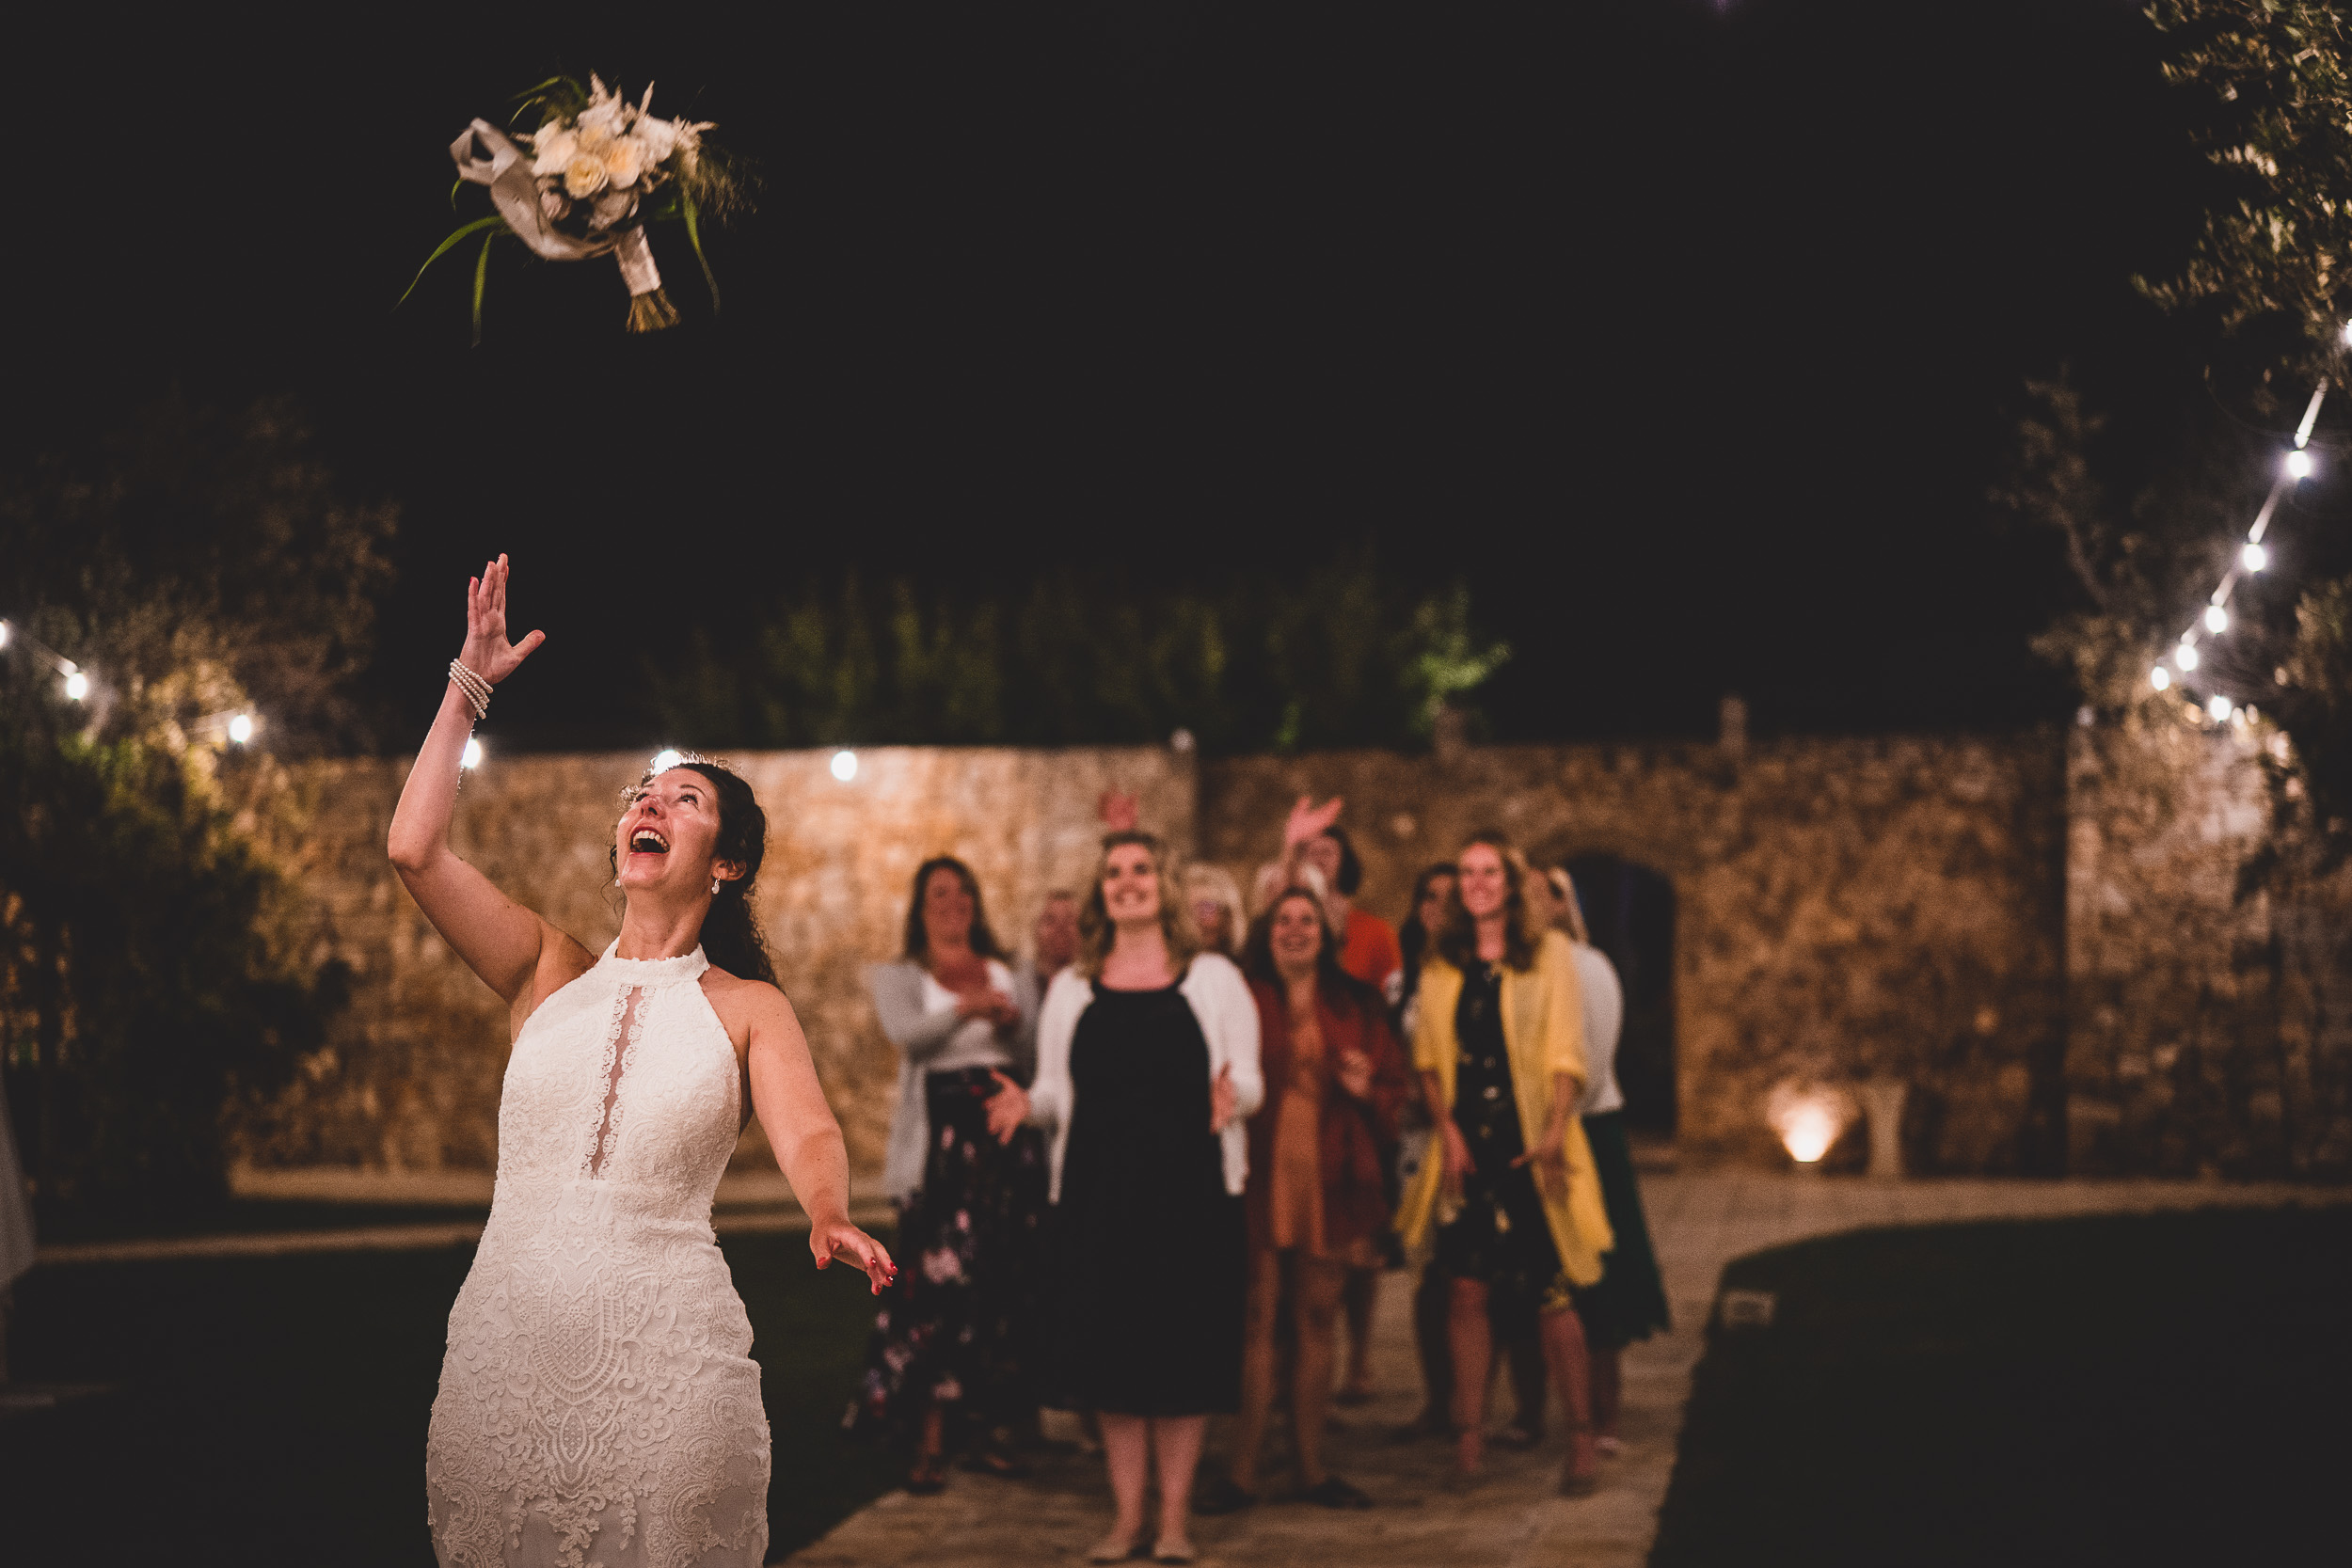 A bride throwing bouquet to bridesmaids during a nighttime wedding.